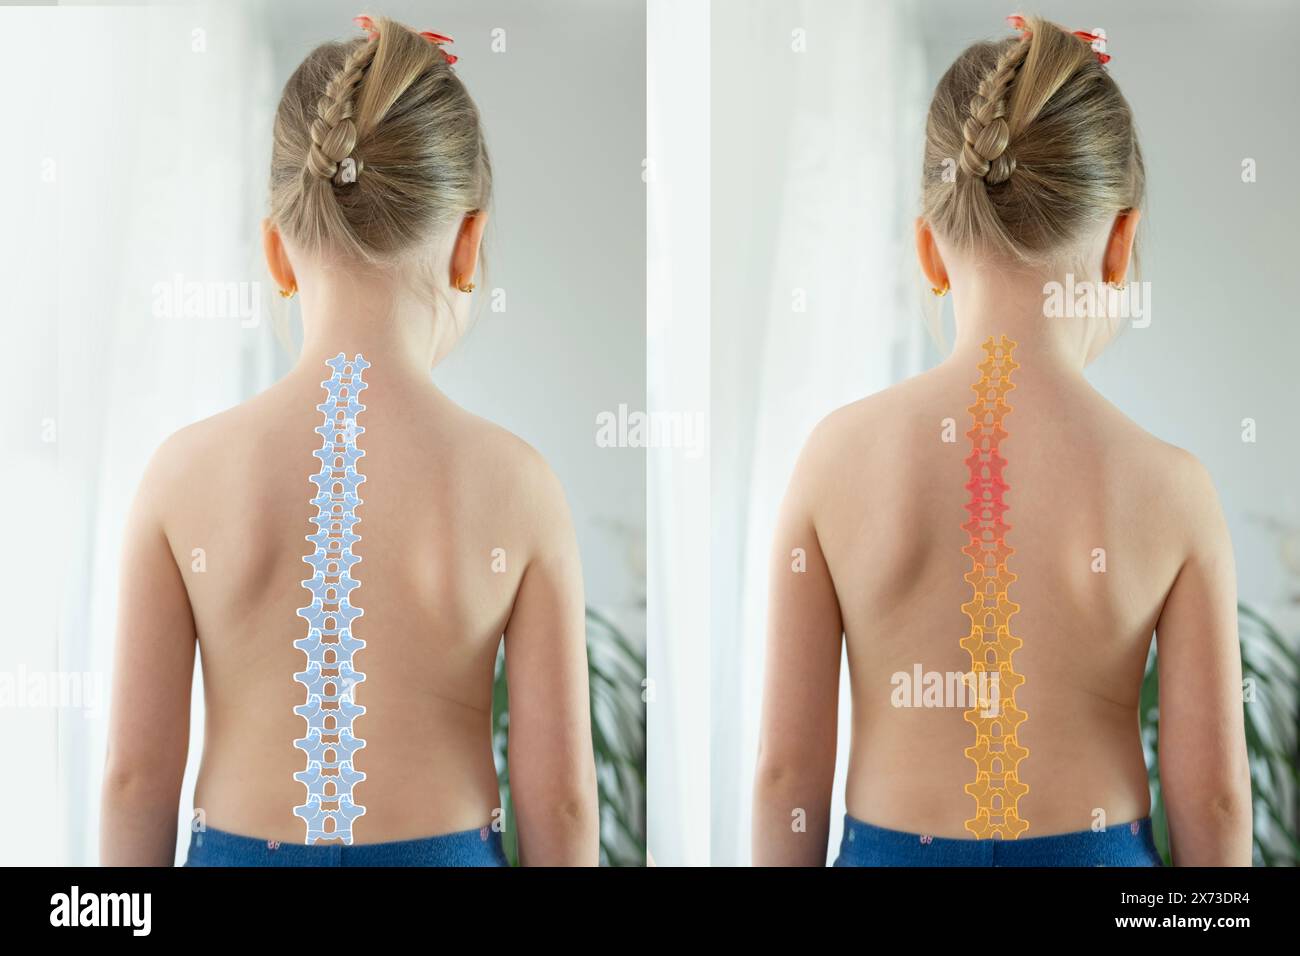 child, young girl showcasing Normal healthy spine and curved spine with scoliosis, need medical attention, spinal health, abnormal spine Stock Photo